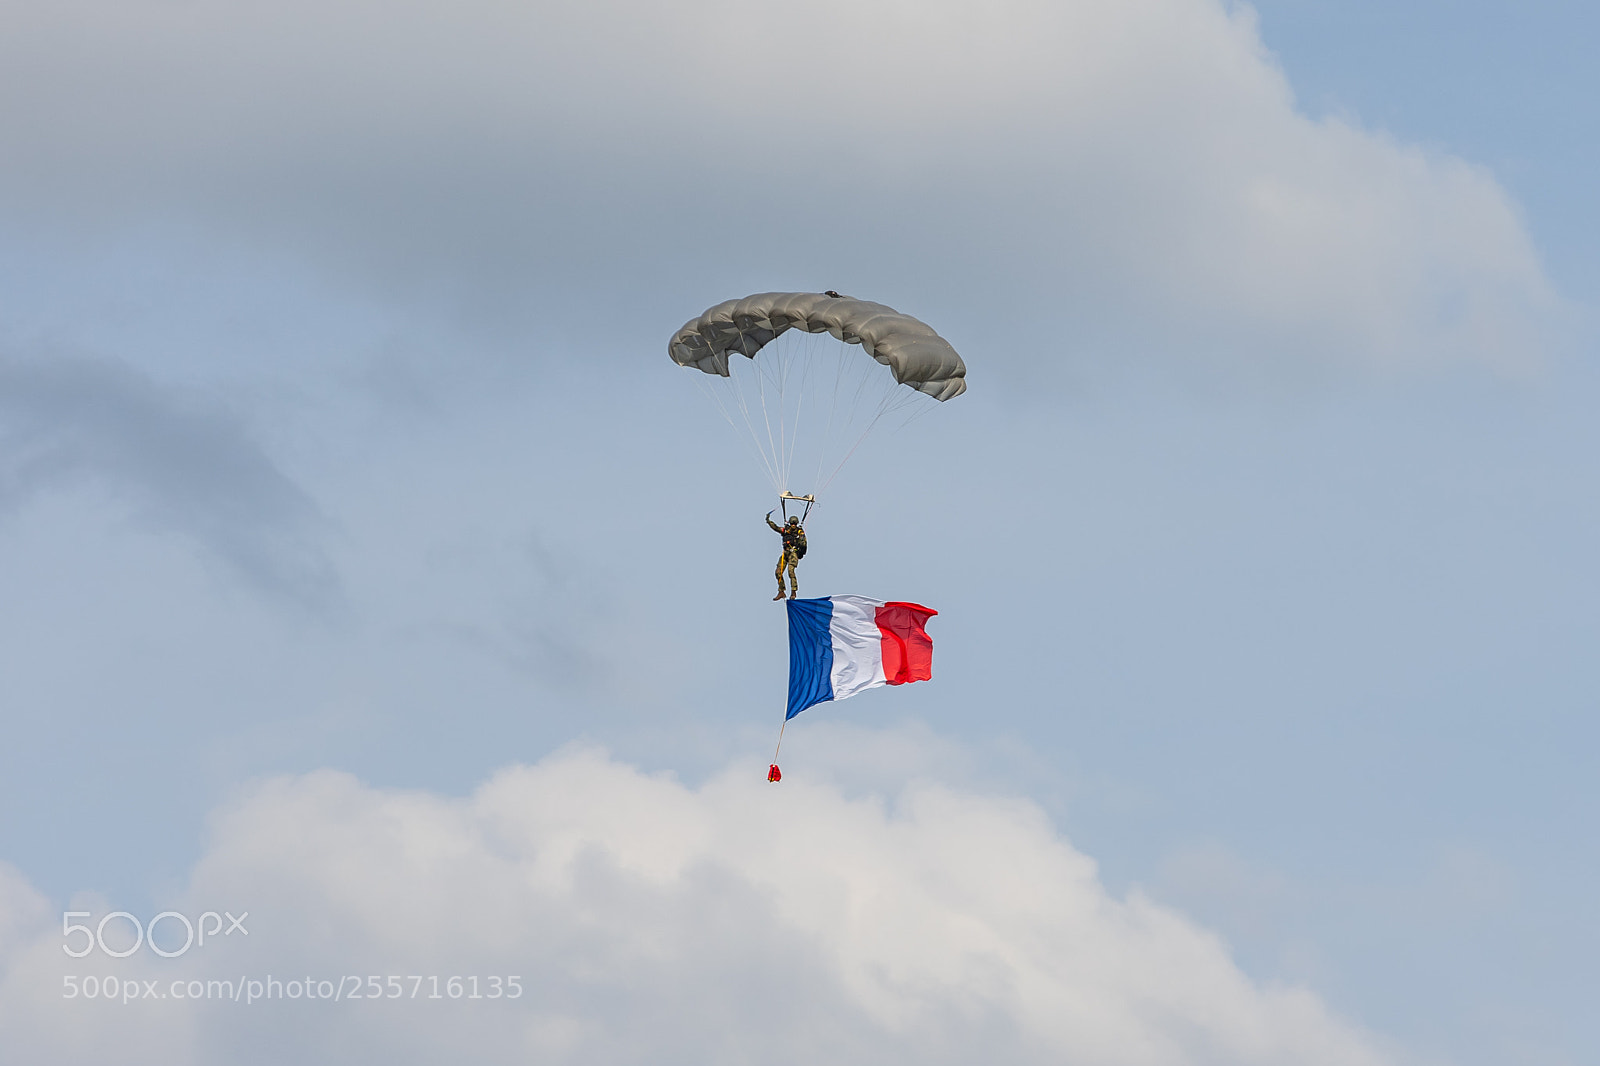 Sony a7 II sample photo. Military paratrooper with the photography